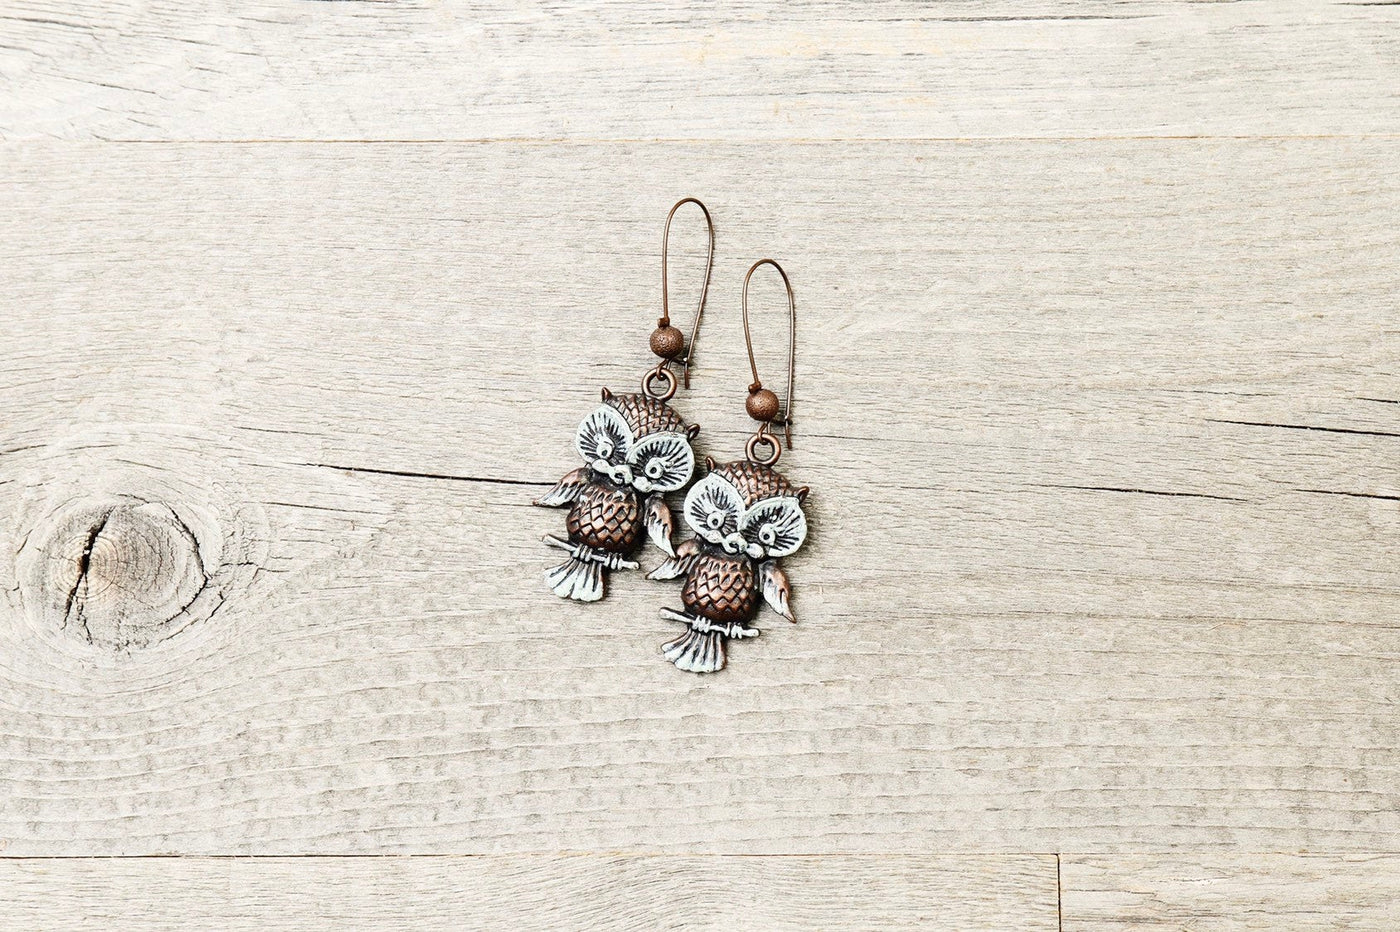 Blue Patina Owl Boho Earrings - Antique Metal Bird Cute Lovely Quirky Dangle Gypsy Hippie Unique Statement Bohemian Rustic Handmade Jewelry